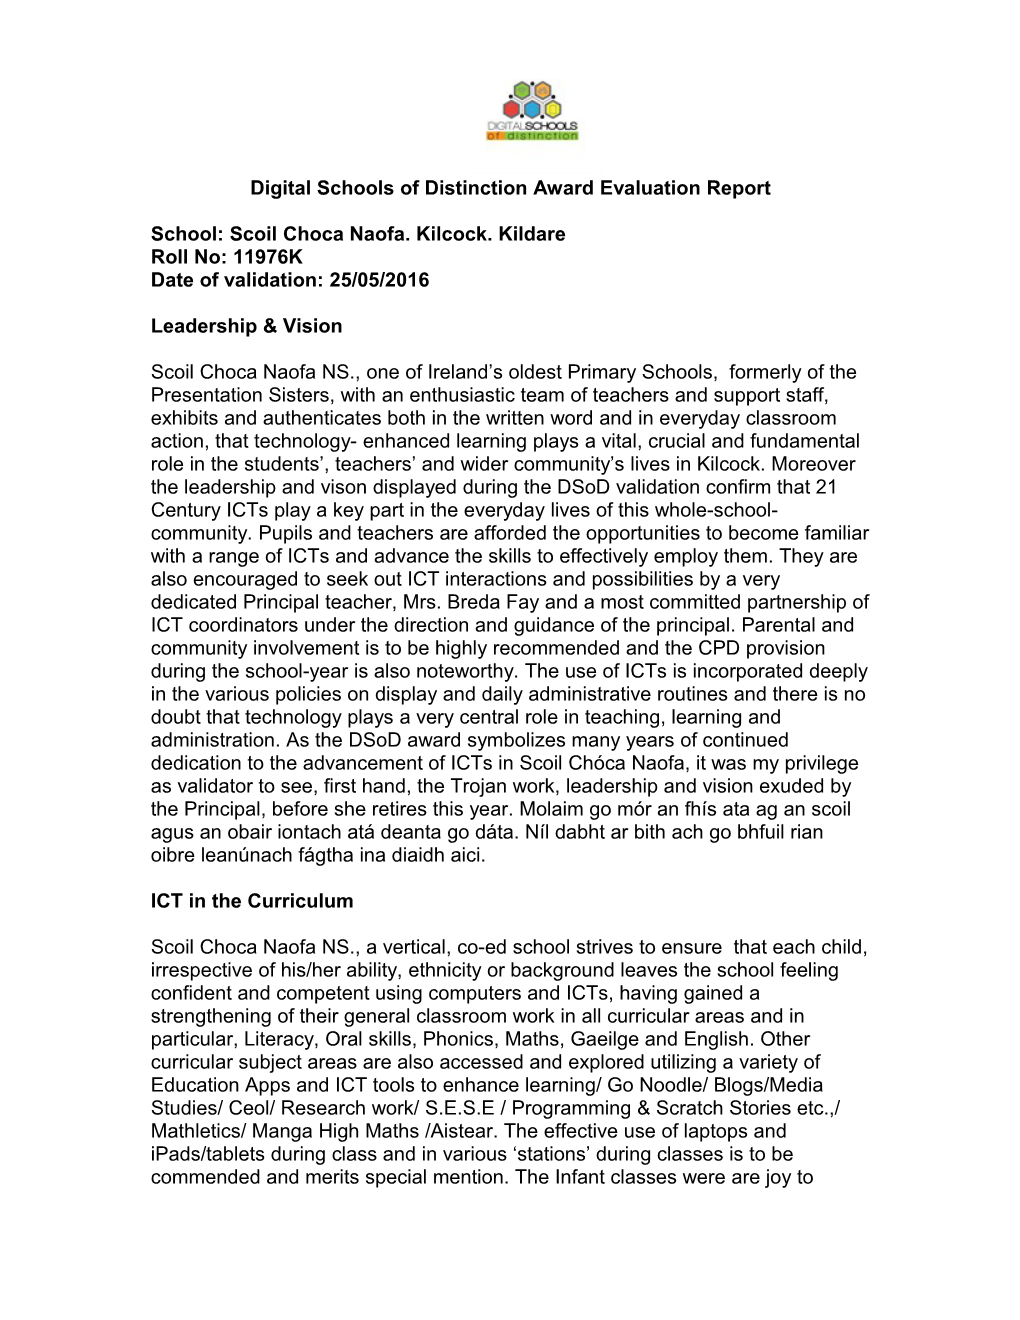 Digital Schools Award Comments and Recommendations